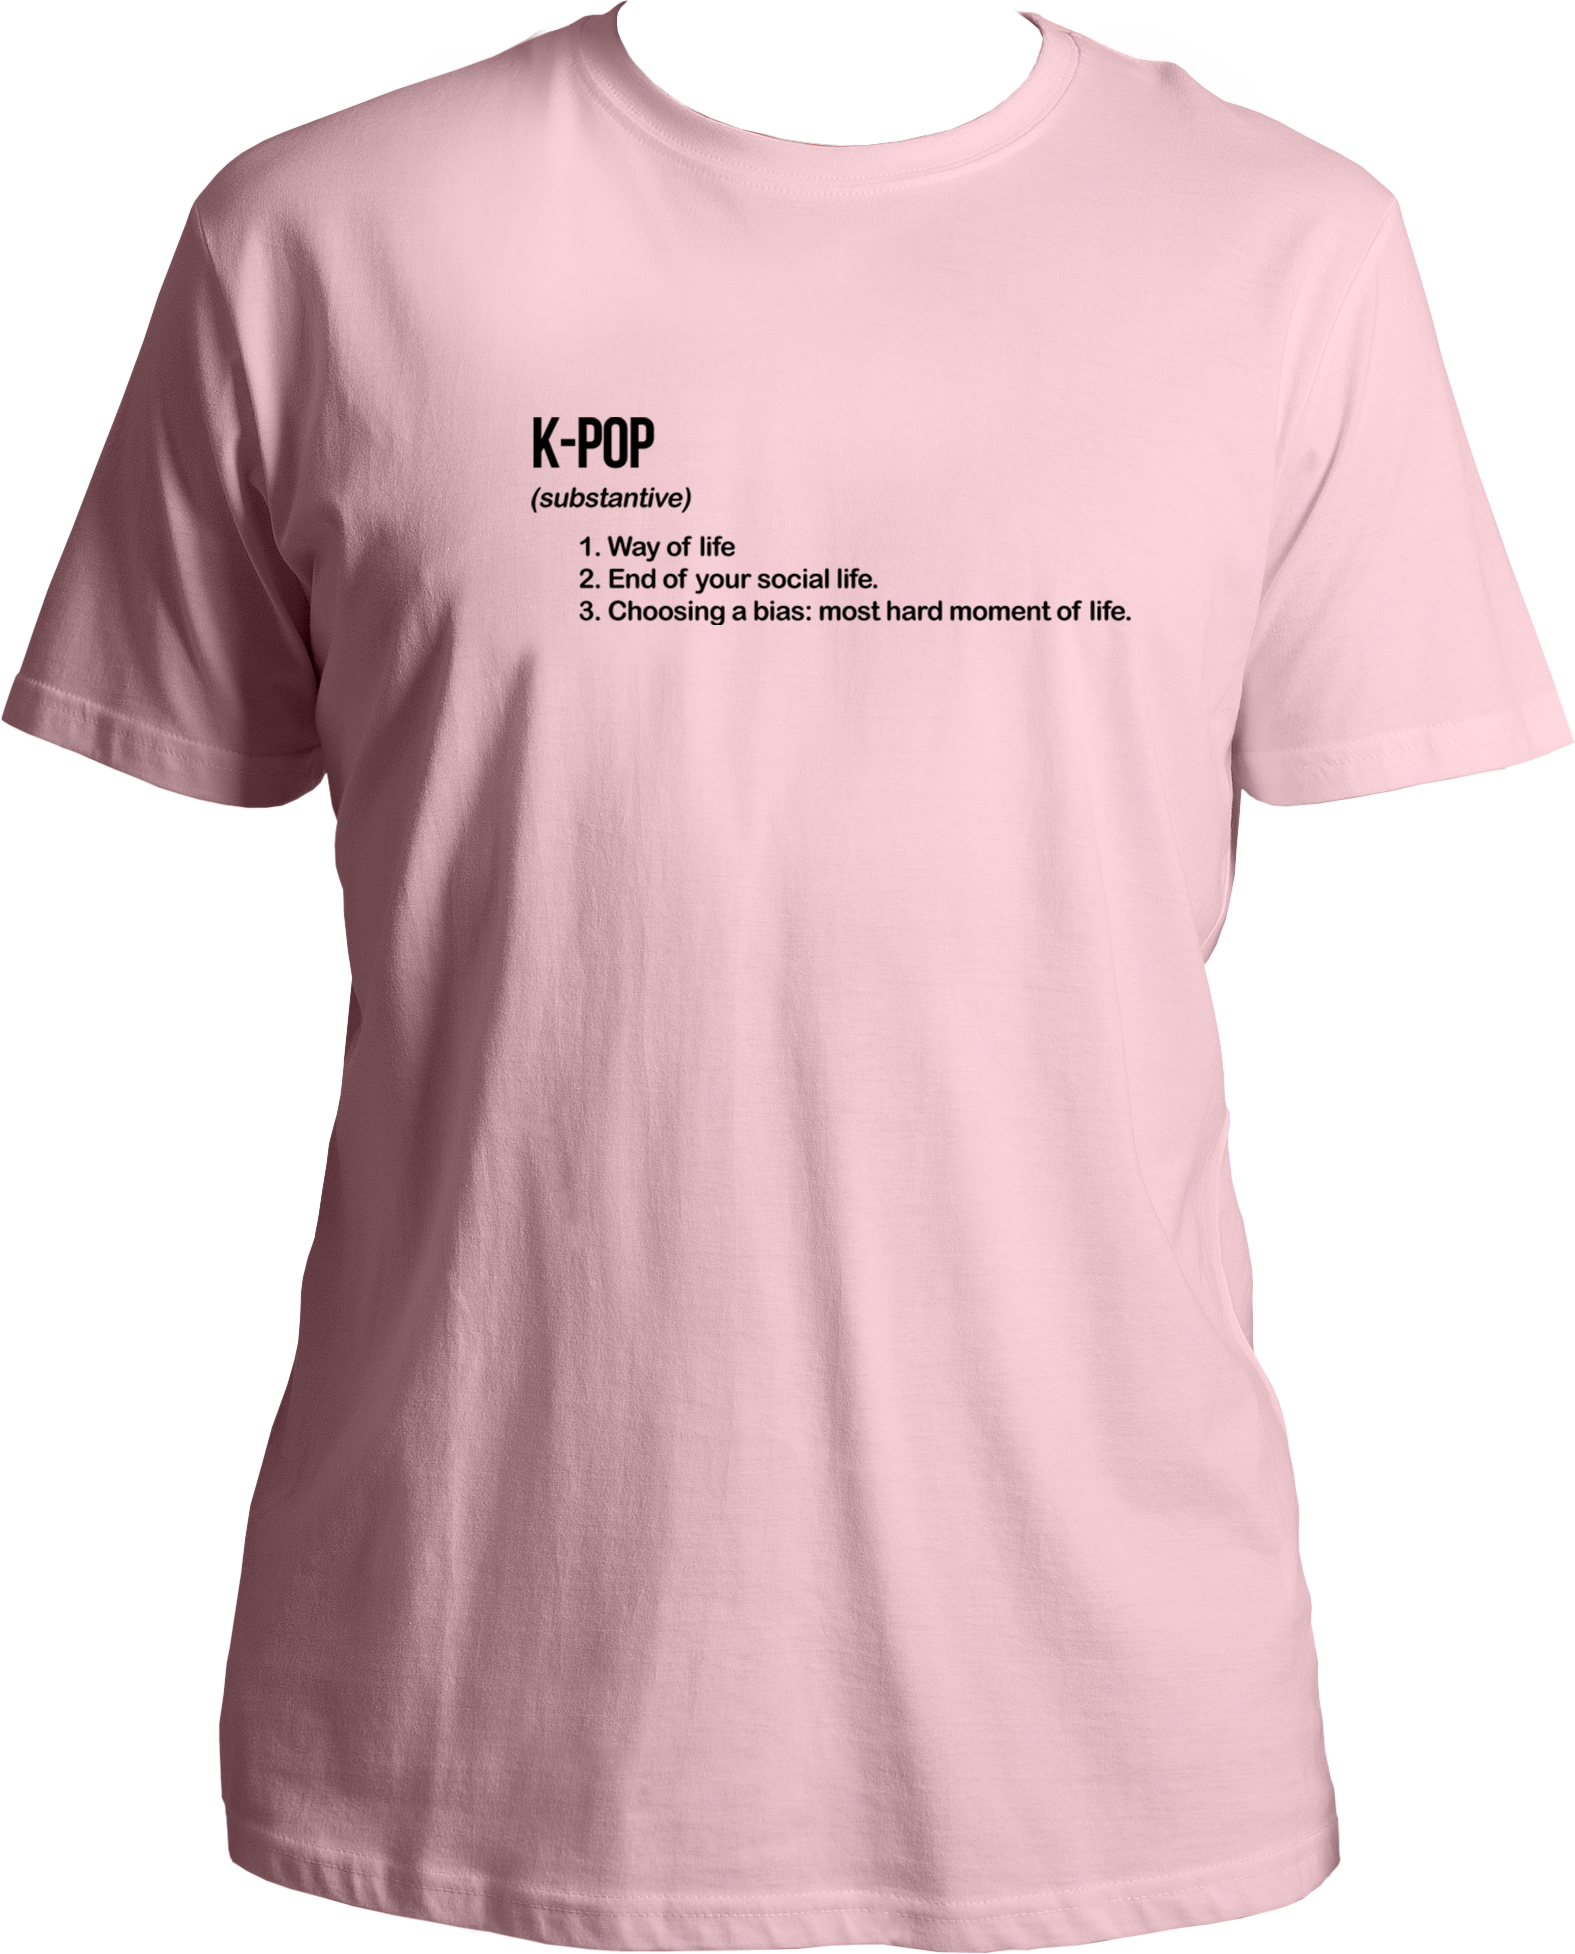 "Rock out in style with our Garrari K-Pop unisex T-shirts! Made from pure cotton, these tees are perfect for showing off your love for Korean pop music. Plus, at the best price, you can't go wrong! Get your hands on these fabulous shirts and proudly declare "I love K-Pop" to the world! #kpoptshirt